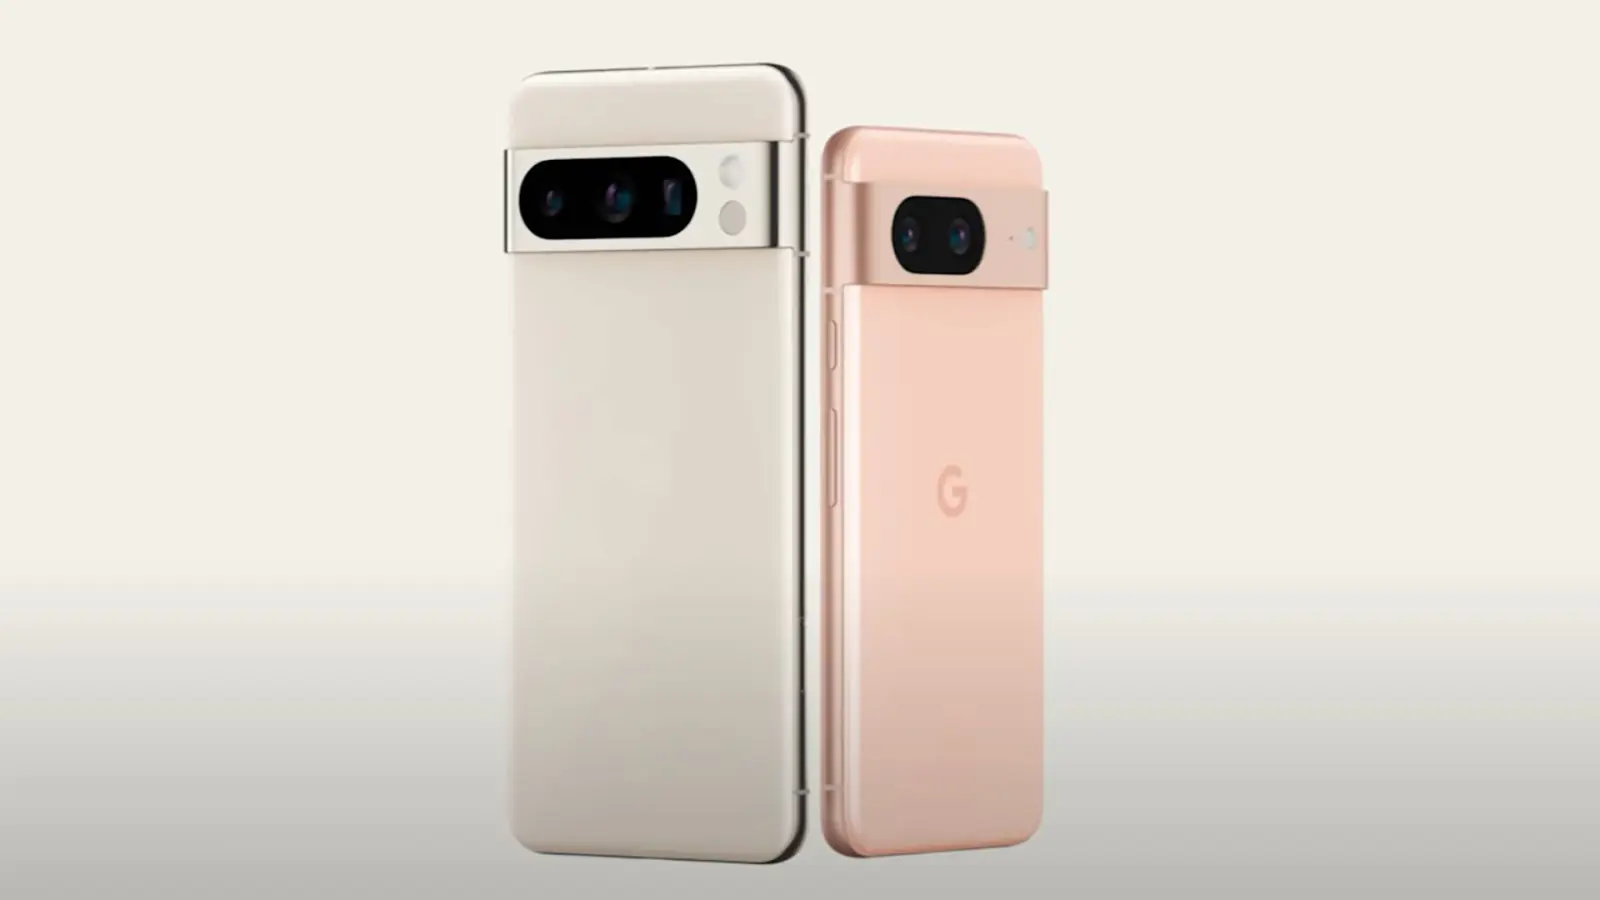 Google Pixel 9 Pro camera module may resemble the iPhone; know details here